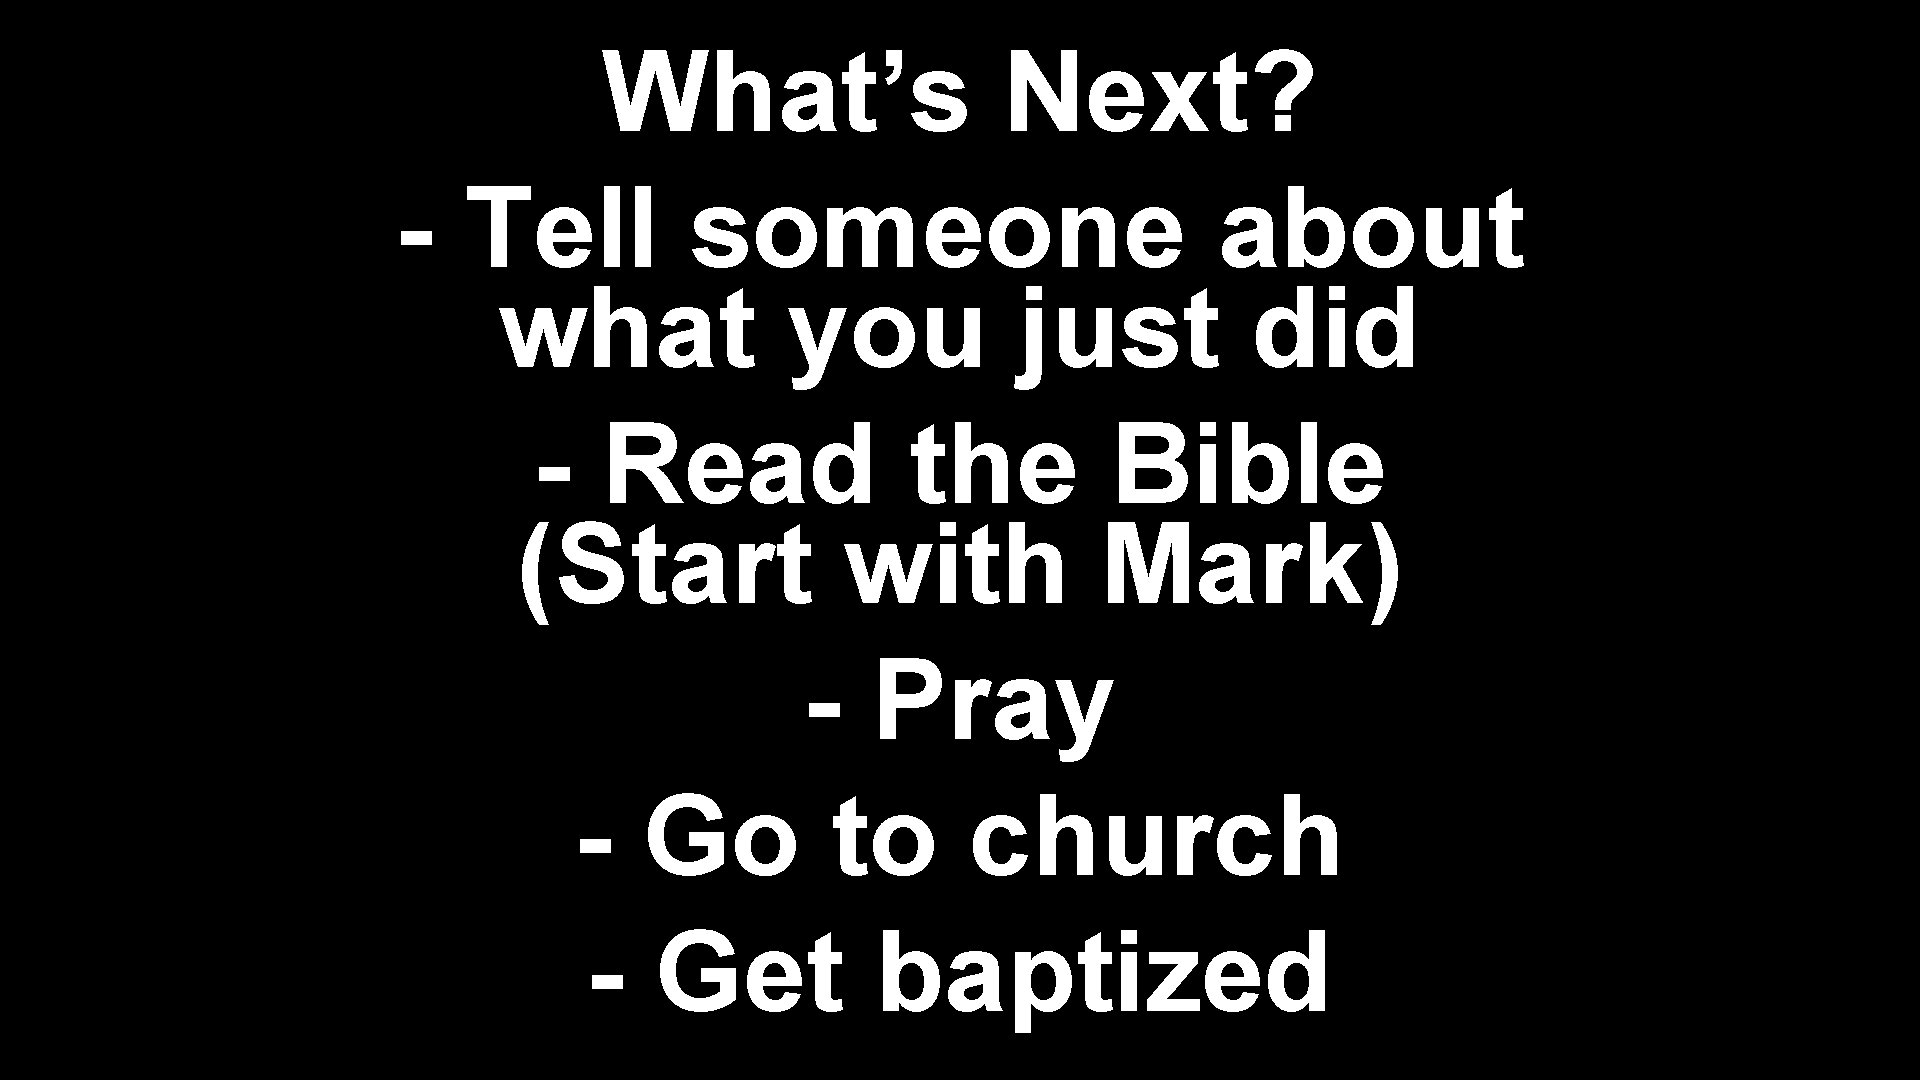 What’s Next? - Tell someone about what you just did - Read the Bible